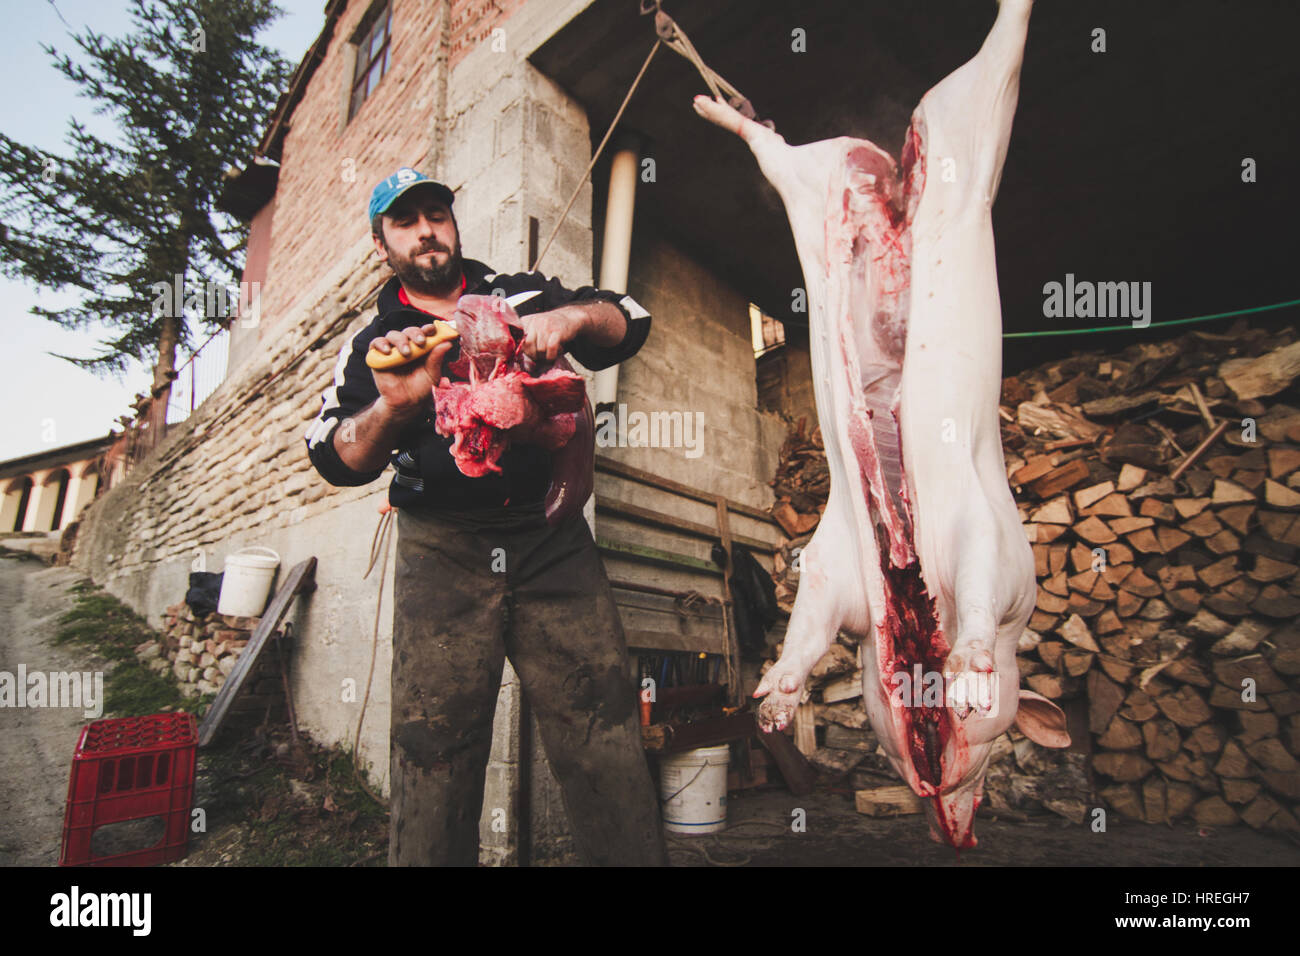 Dead pig cut open by a man in a slaughterhouse in Alba, which is located in the province of Piedmont, Italy. Stock Photo